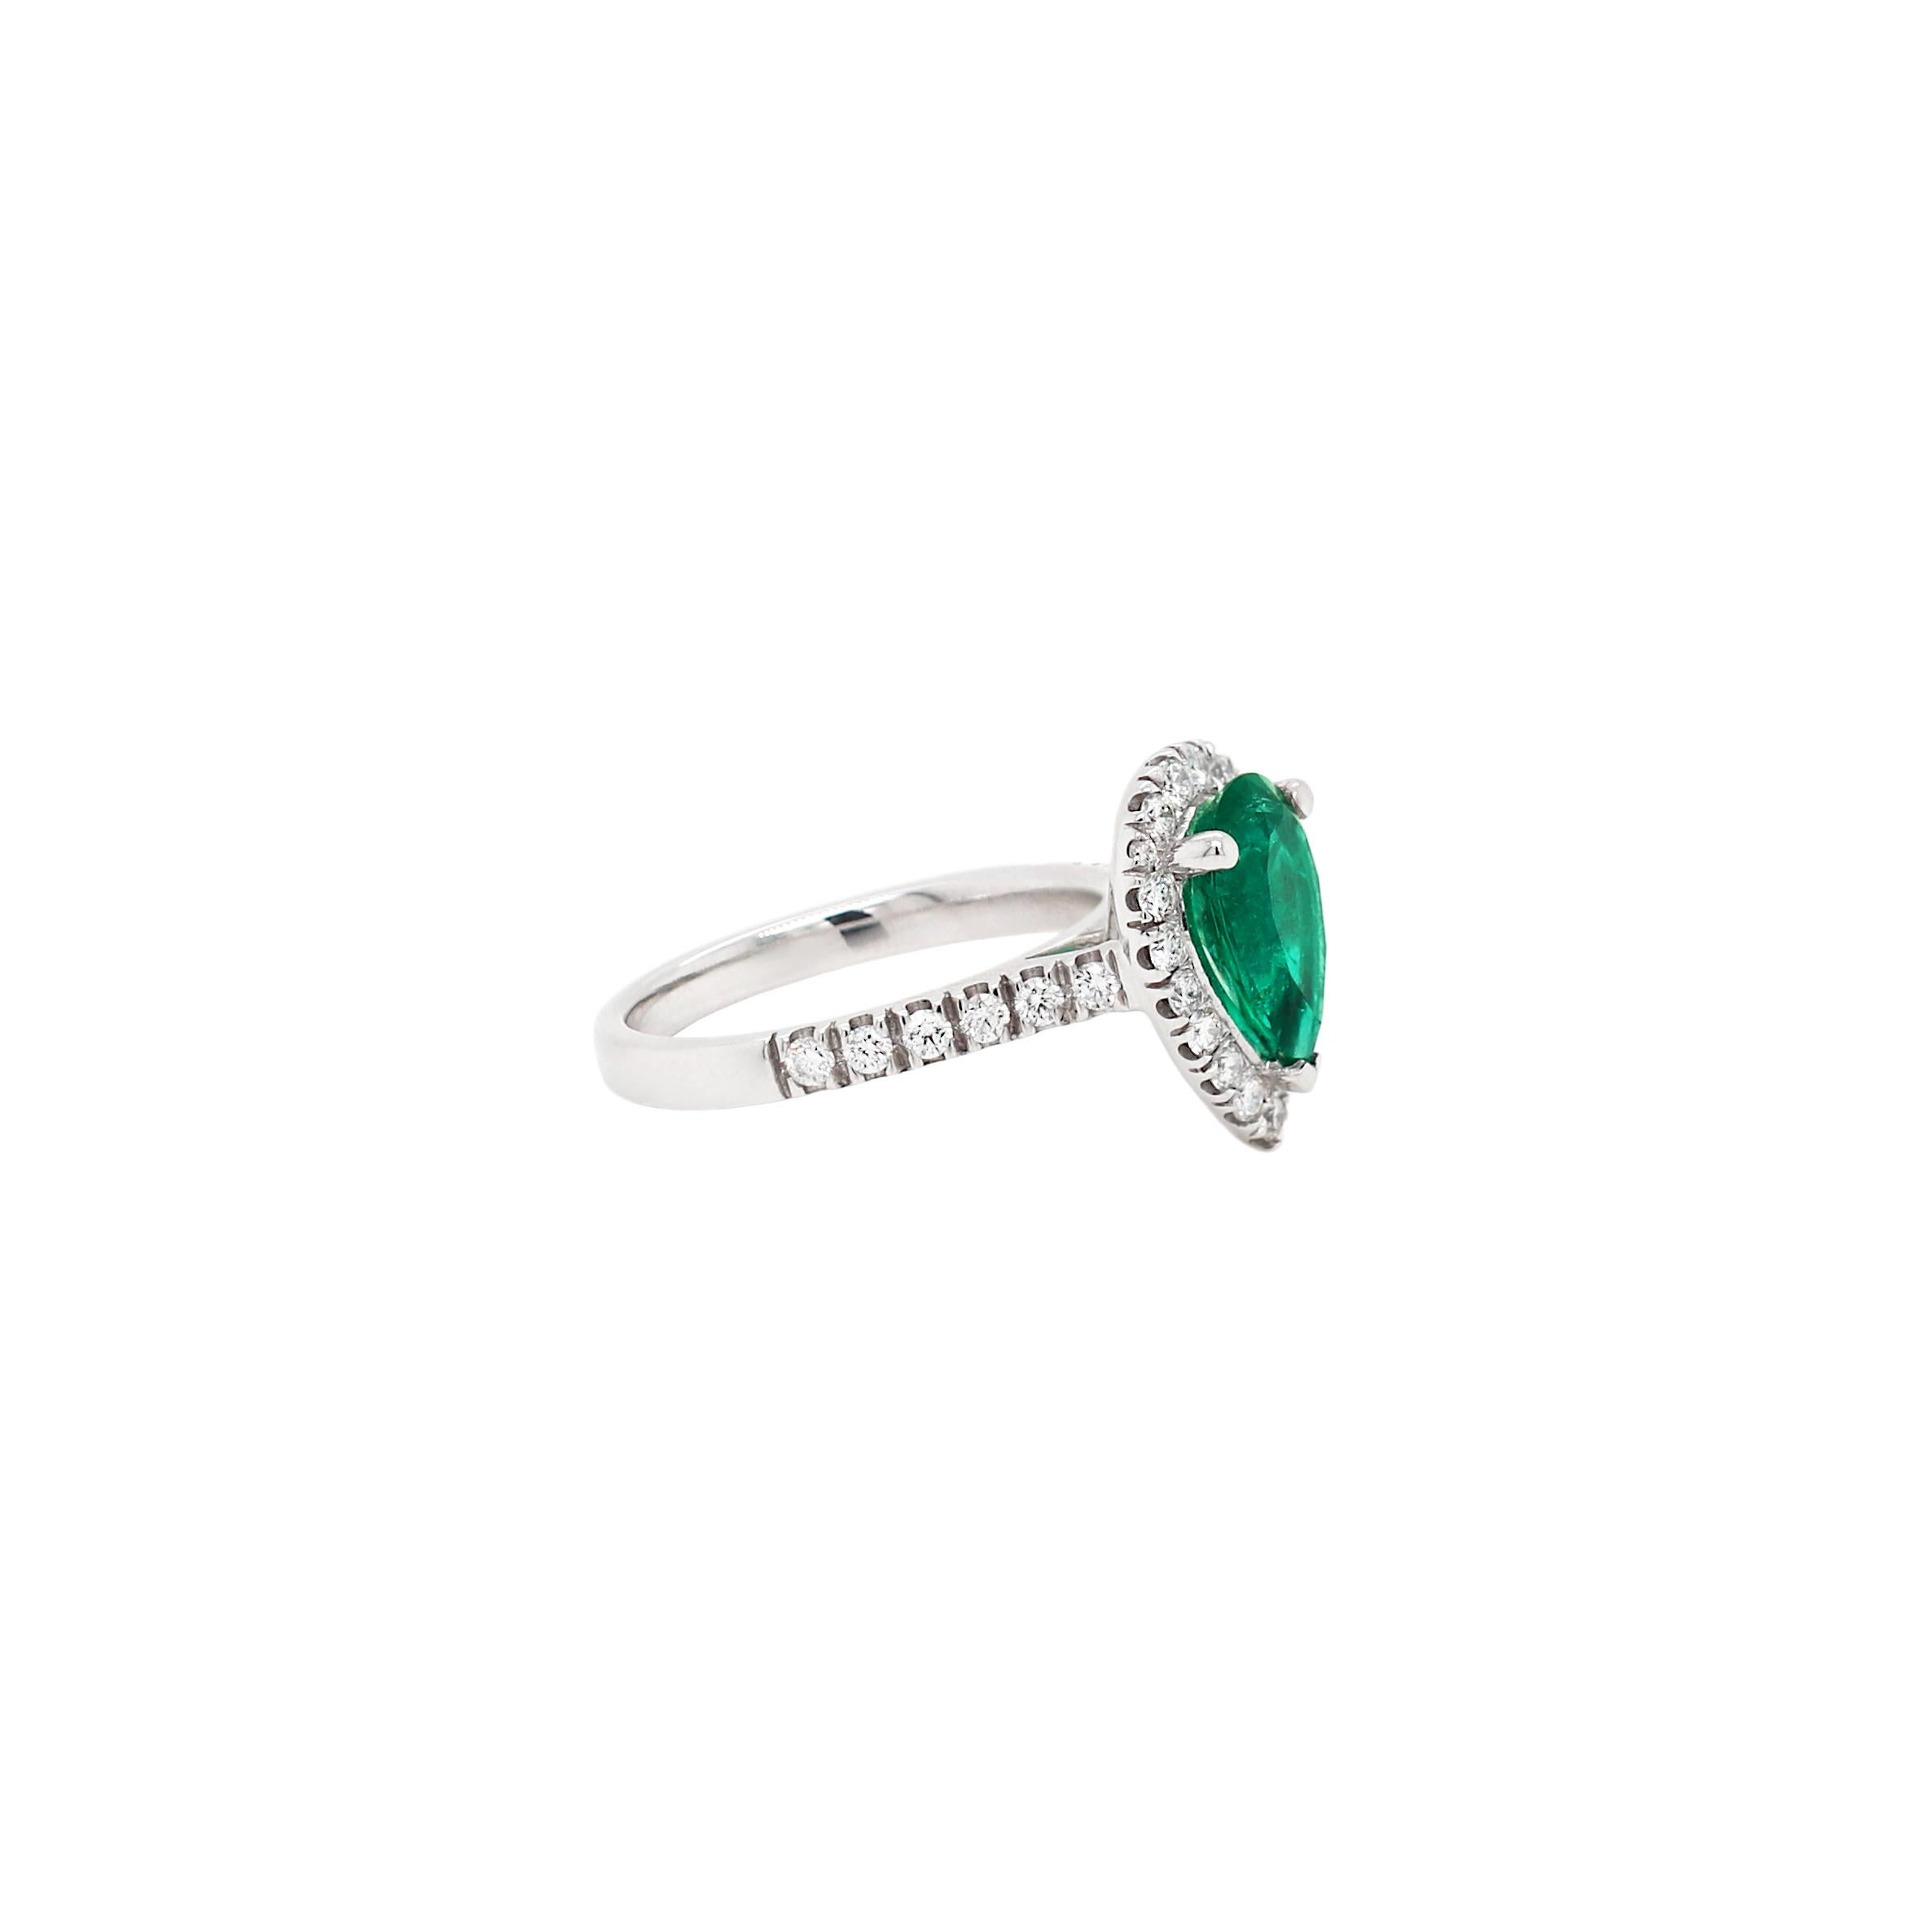 This beautiful engagement ring features a vibrant green pear shaped emerald weighing 1.89ct in a three claw open back setting. The emerald is wonderfully surrounded by 19 round brilliant cut diamonds and further accompanied by 5 round brilliant cut